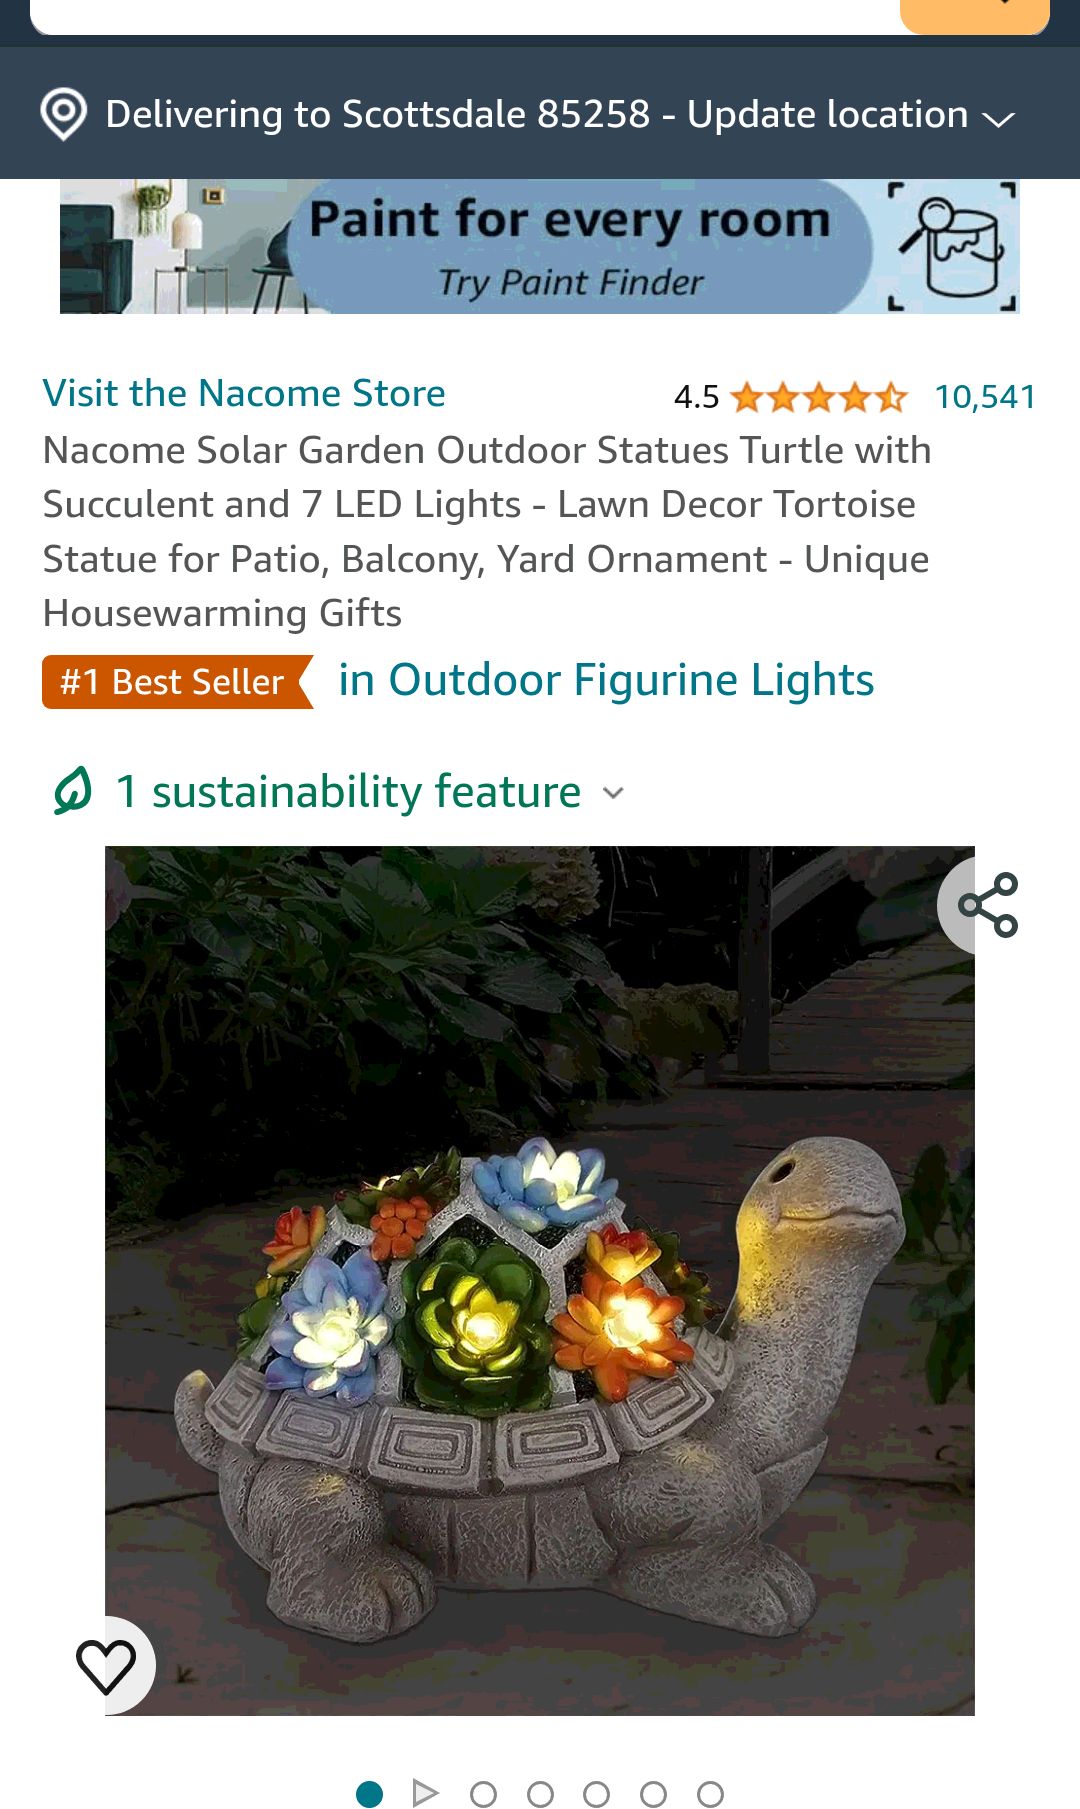 Nacome Solar Garden Outdoor Statues Turtle with Succulent and 7 LED Lights - Lawn Decor Tortoise Statue for Patio, Balcony, Yard Ornament - Unique Housewarming Gifts - Amazon.com